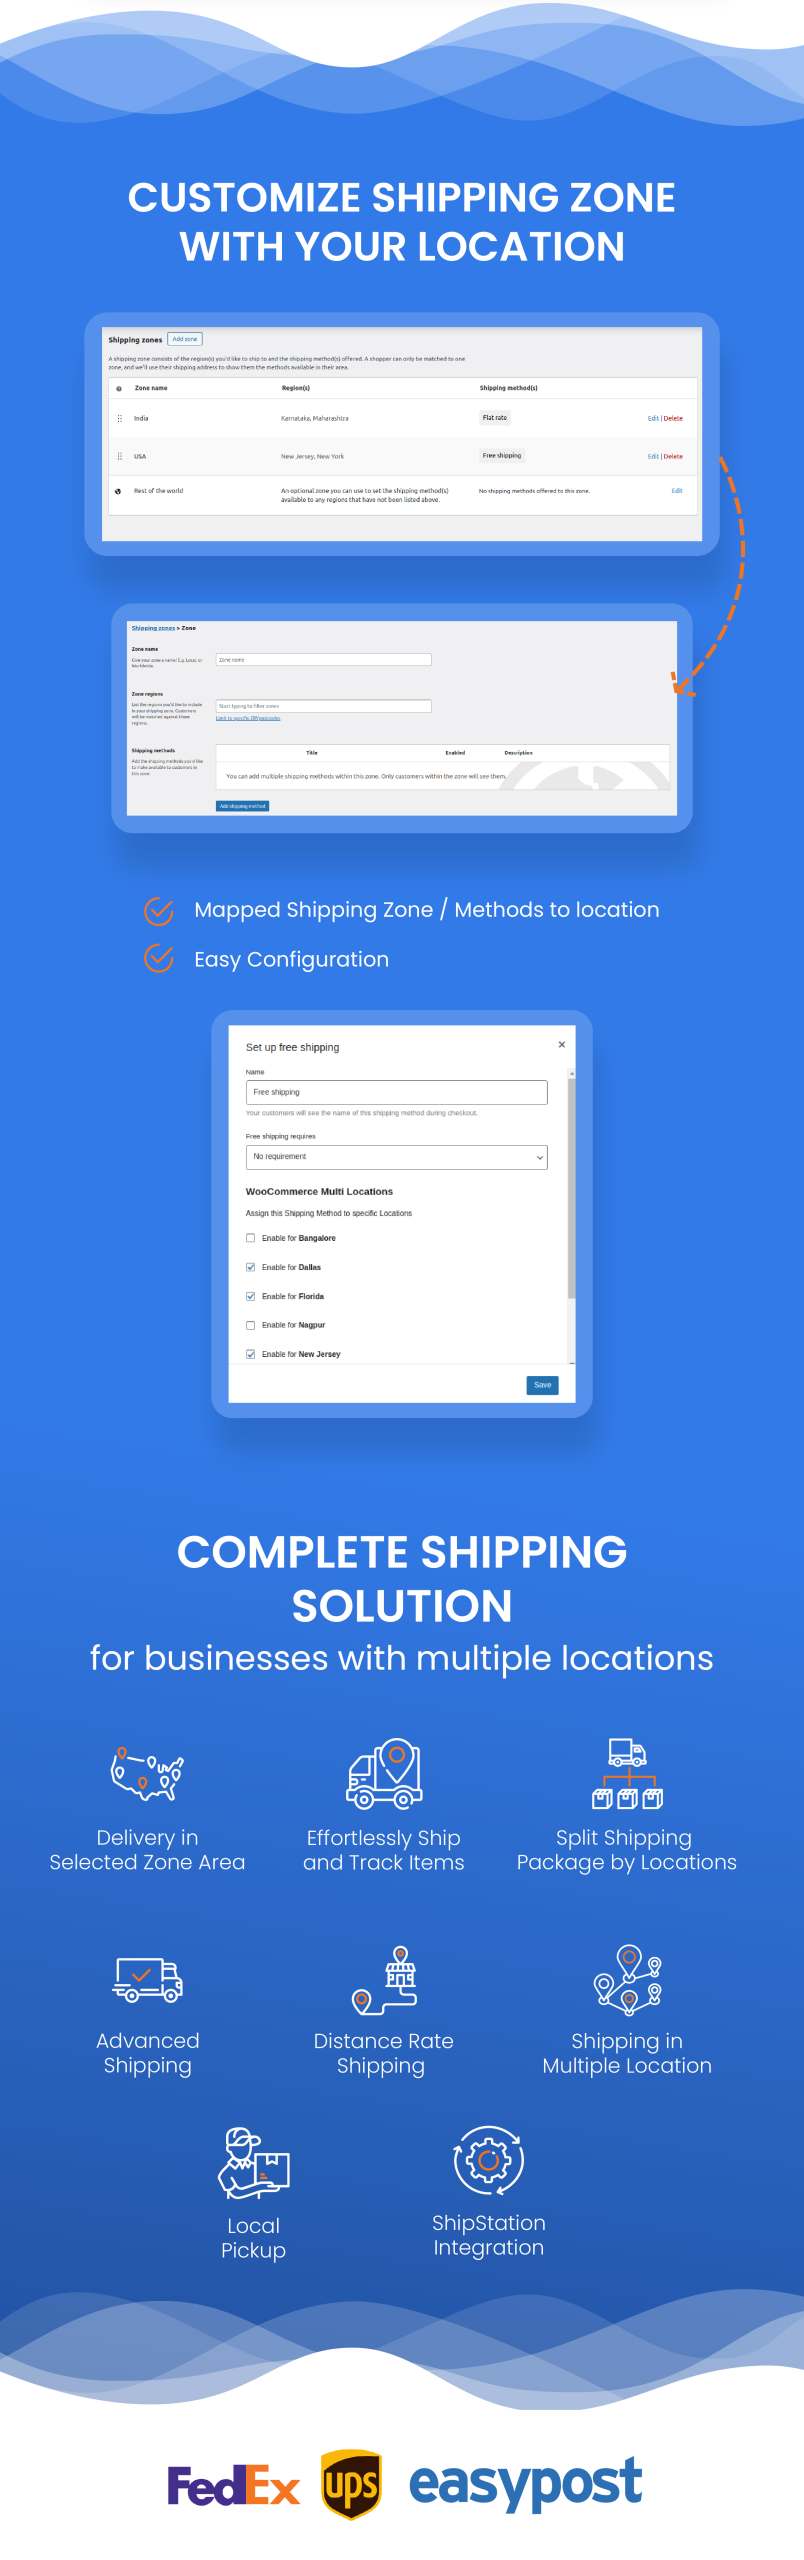 WooCommerce Multi Locations Inventory Management - 4